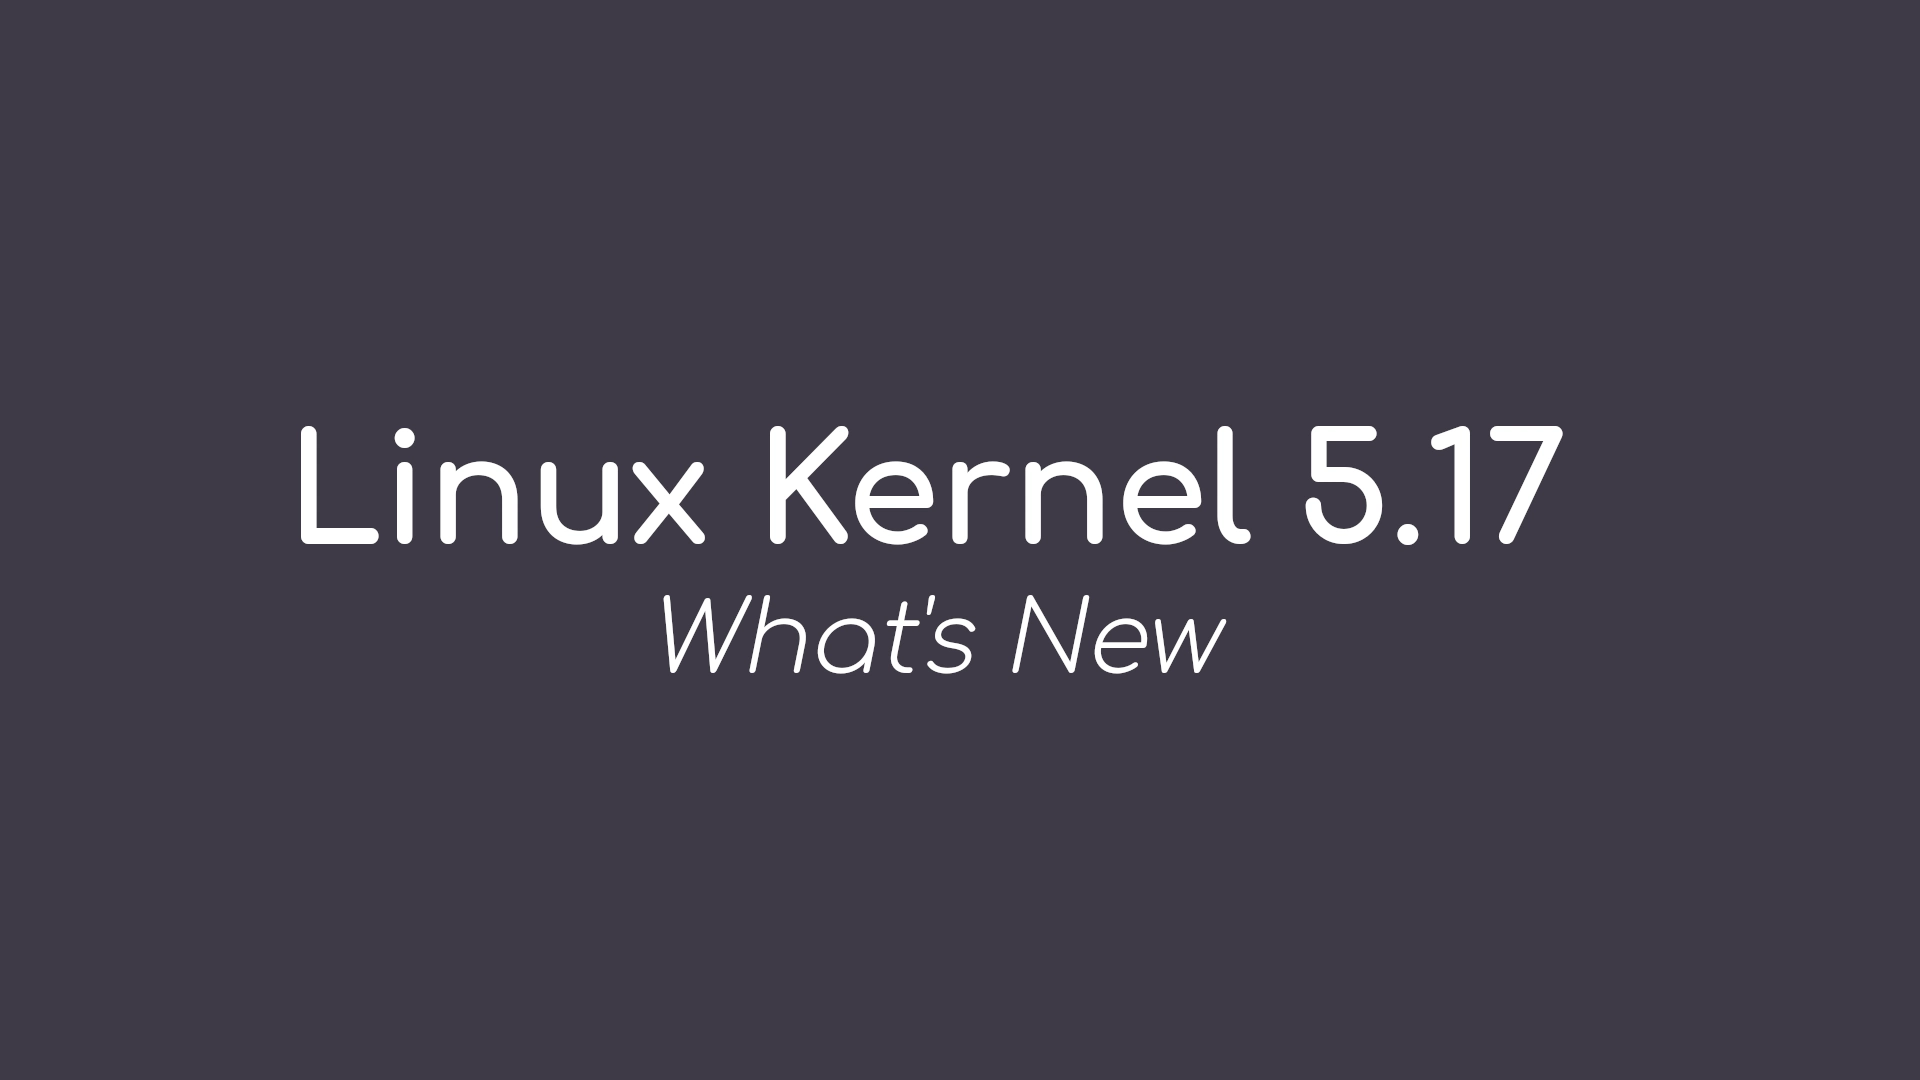 Linux Kernel 5.17 Officially Released, This Is What’s New